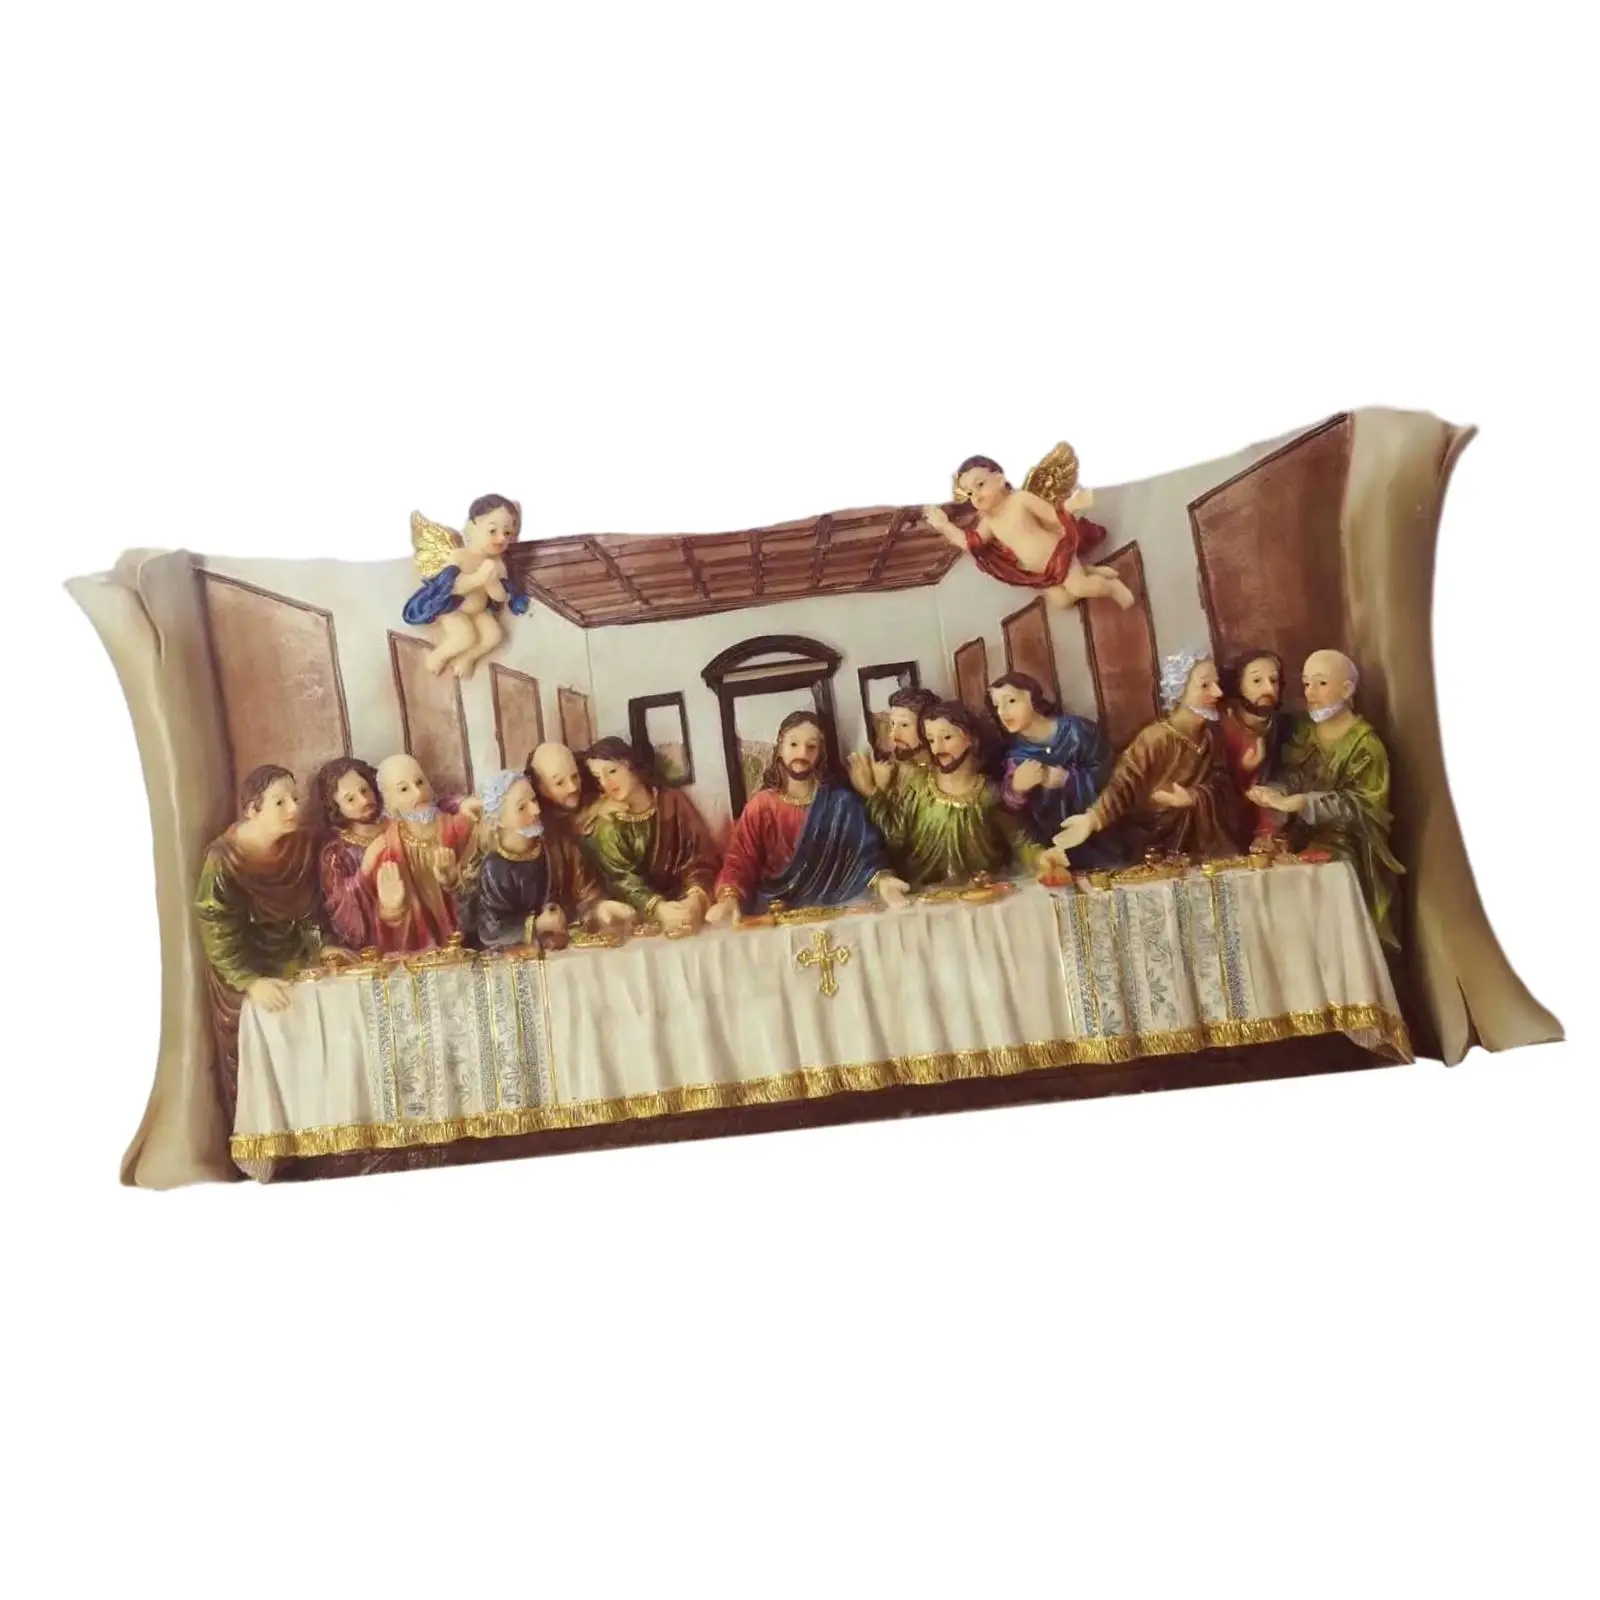 Last Supper Figures Home Decor Office Decoration Decorative Religious Statue for Living Room Home Office Bedroom Religious Gift